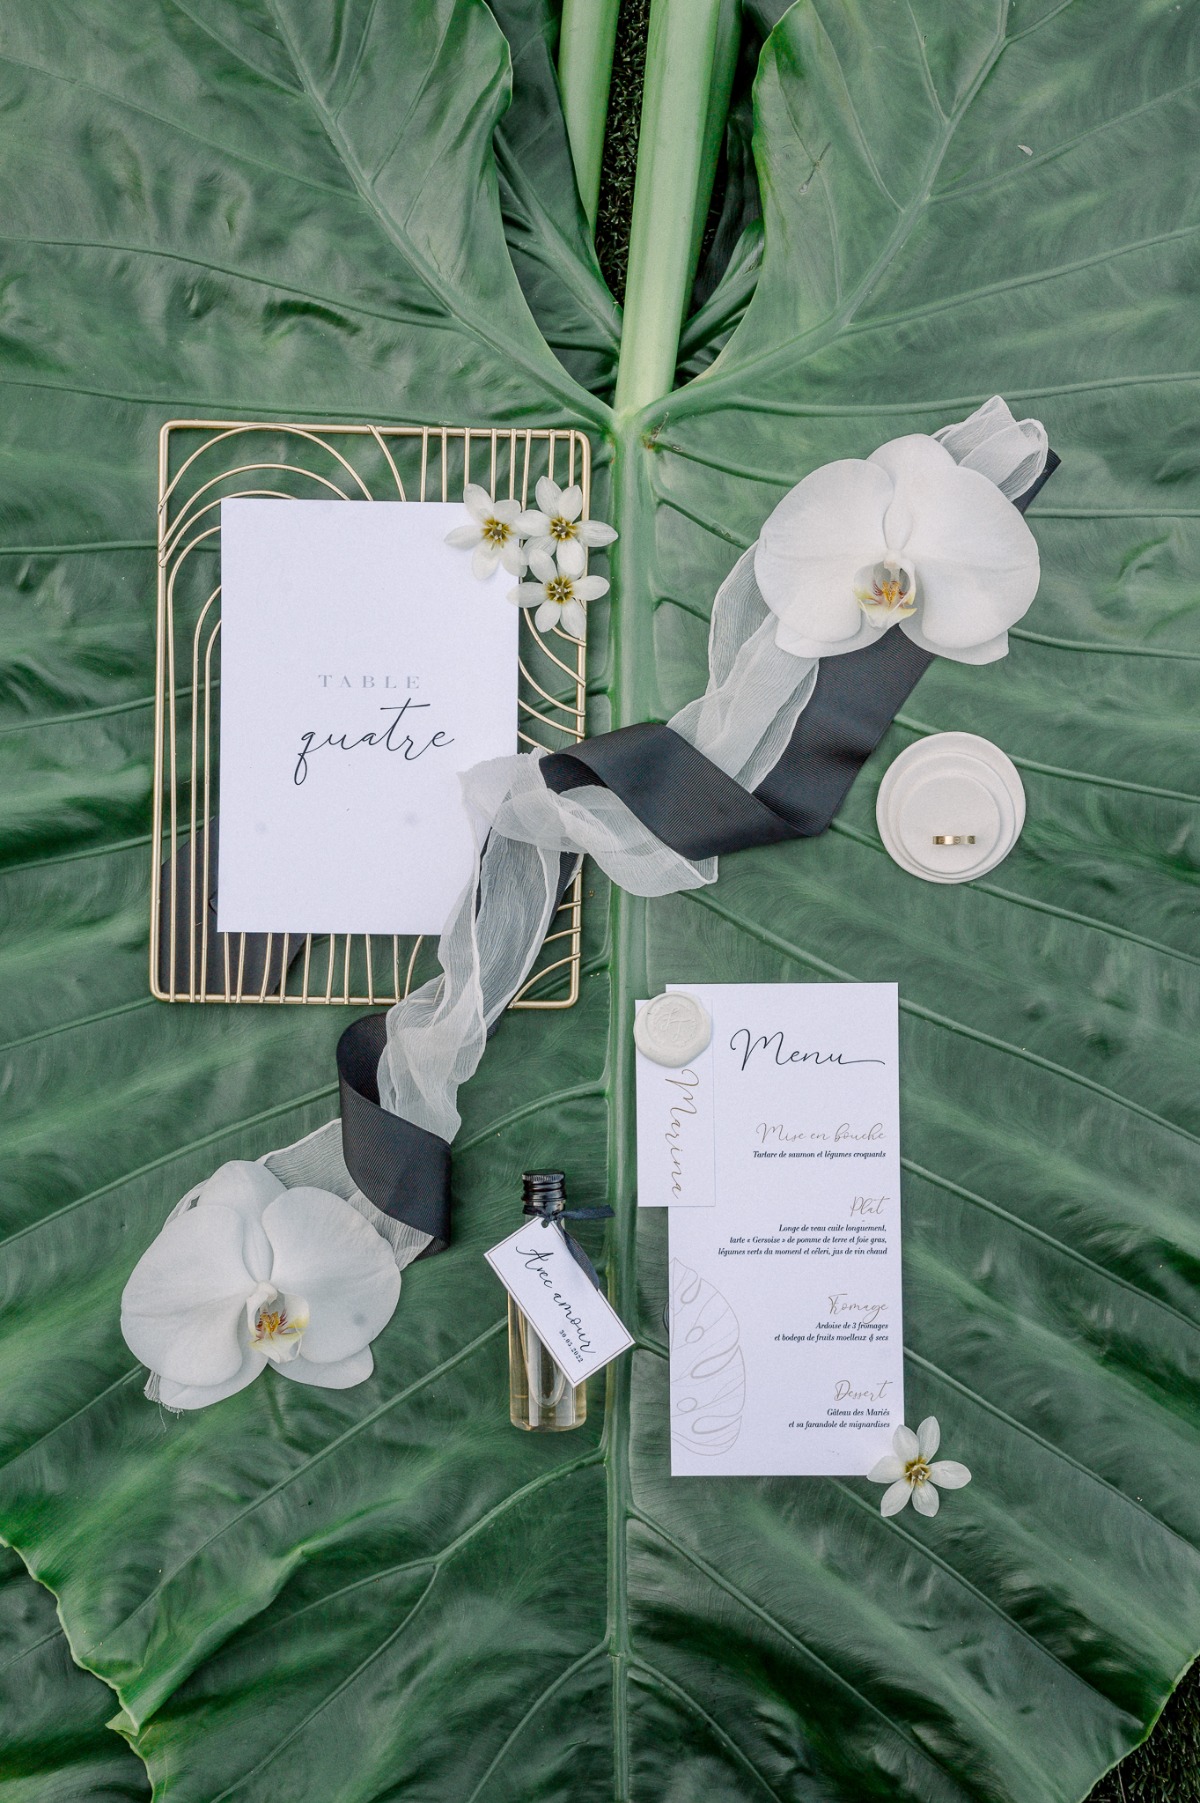 Aerial photo of menu, sashes, and table number on banana leaf